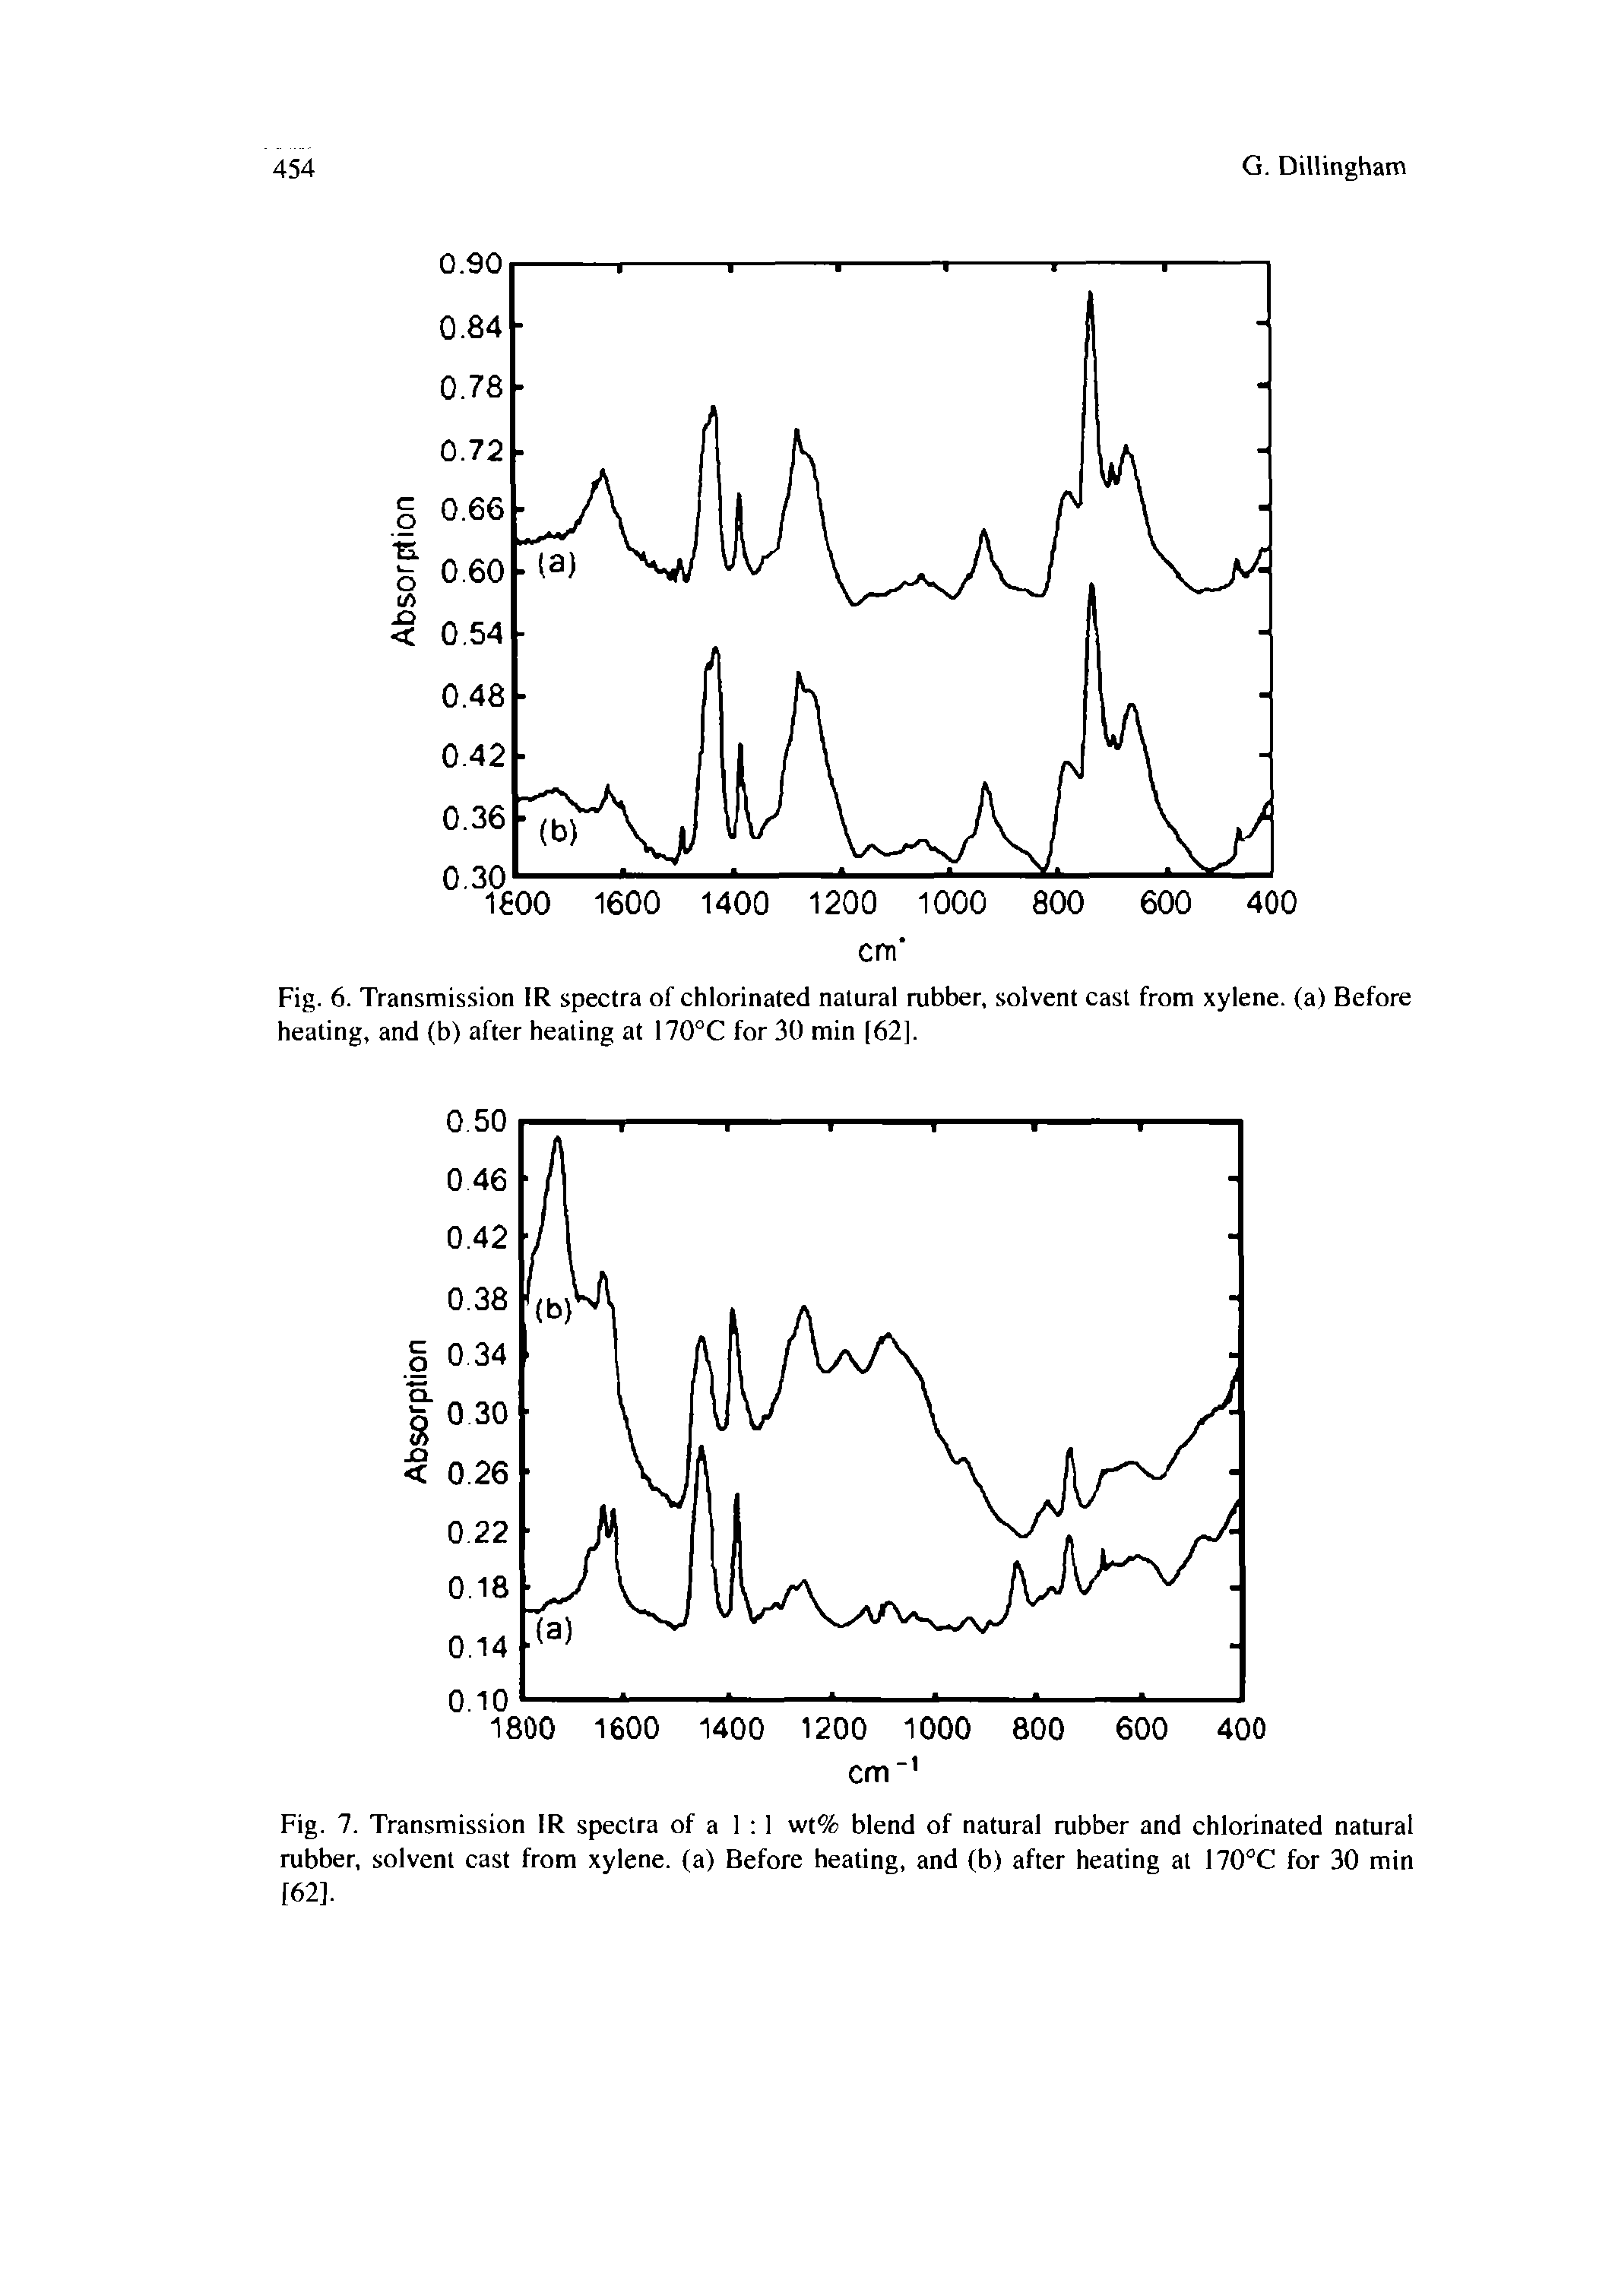 Fig. 7. Transmission IR spectra of a 1 1 wt% blend of natural rubber and chlorinated natural rubber, solvent cast from xylene, (a) Before heating, and (b) after heating at 170°C for 30 min [62].